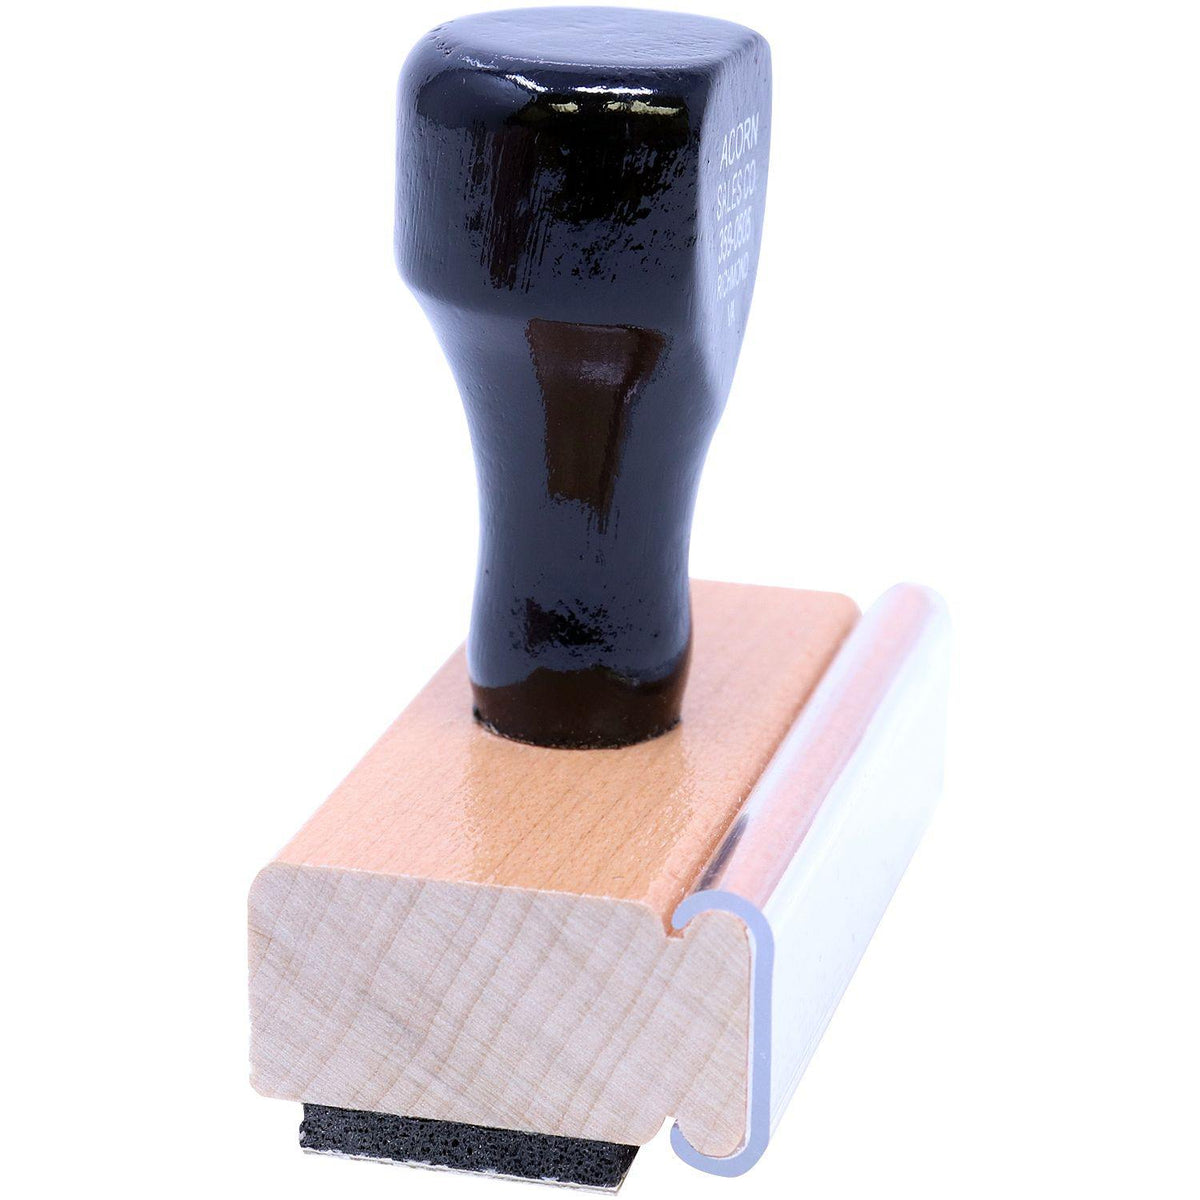 Side View of Large Approved For Payment Rubber Stamp at an Angle